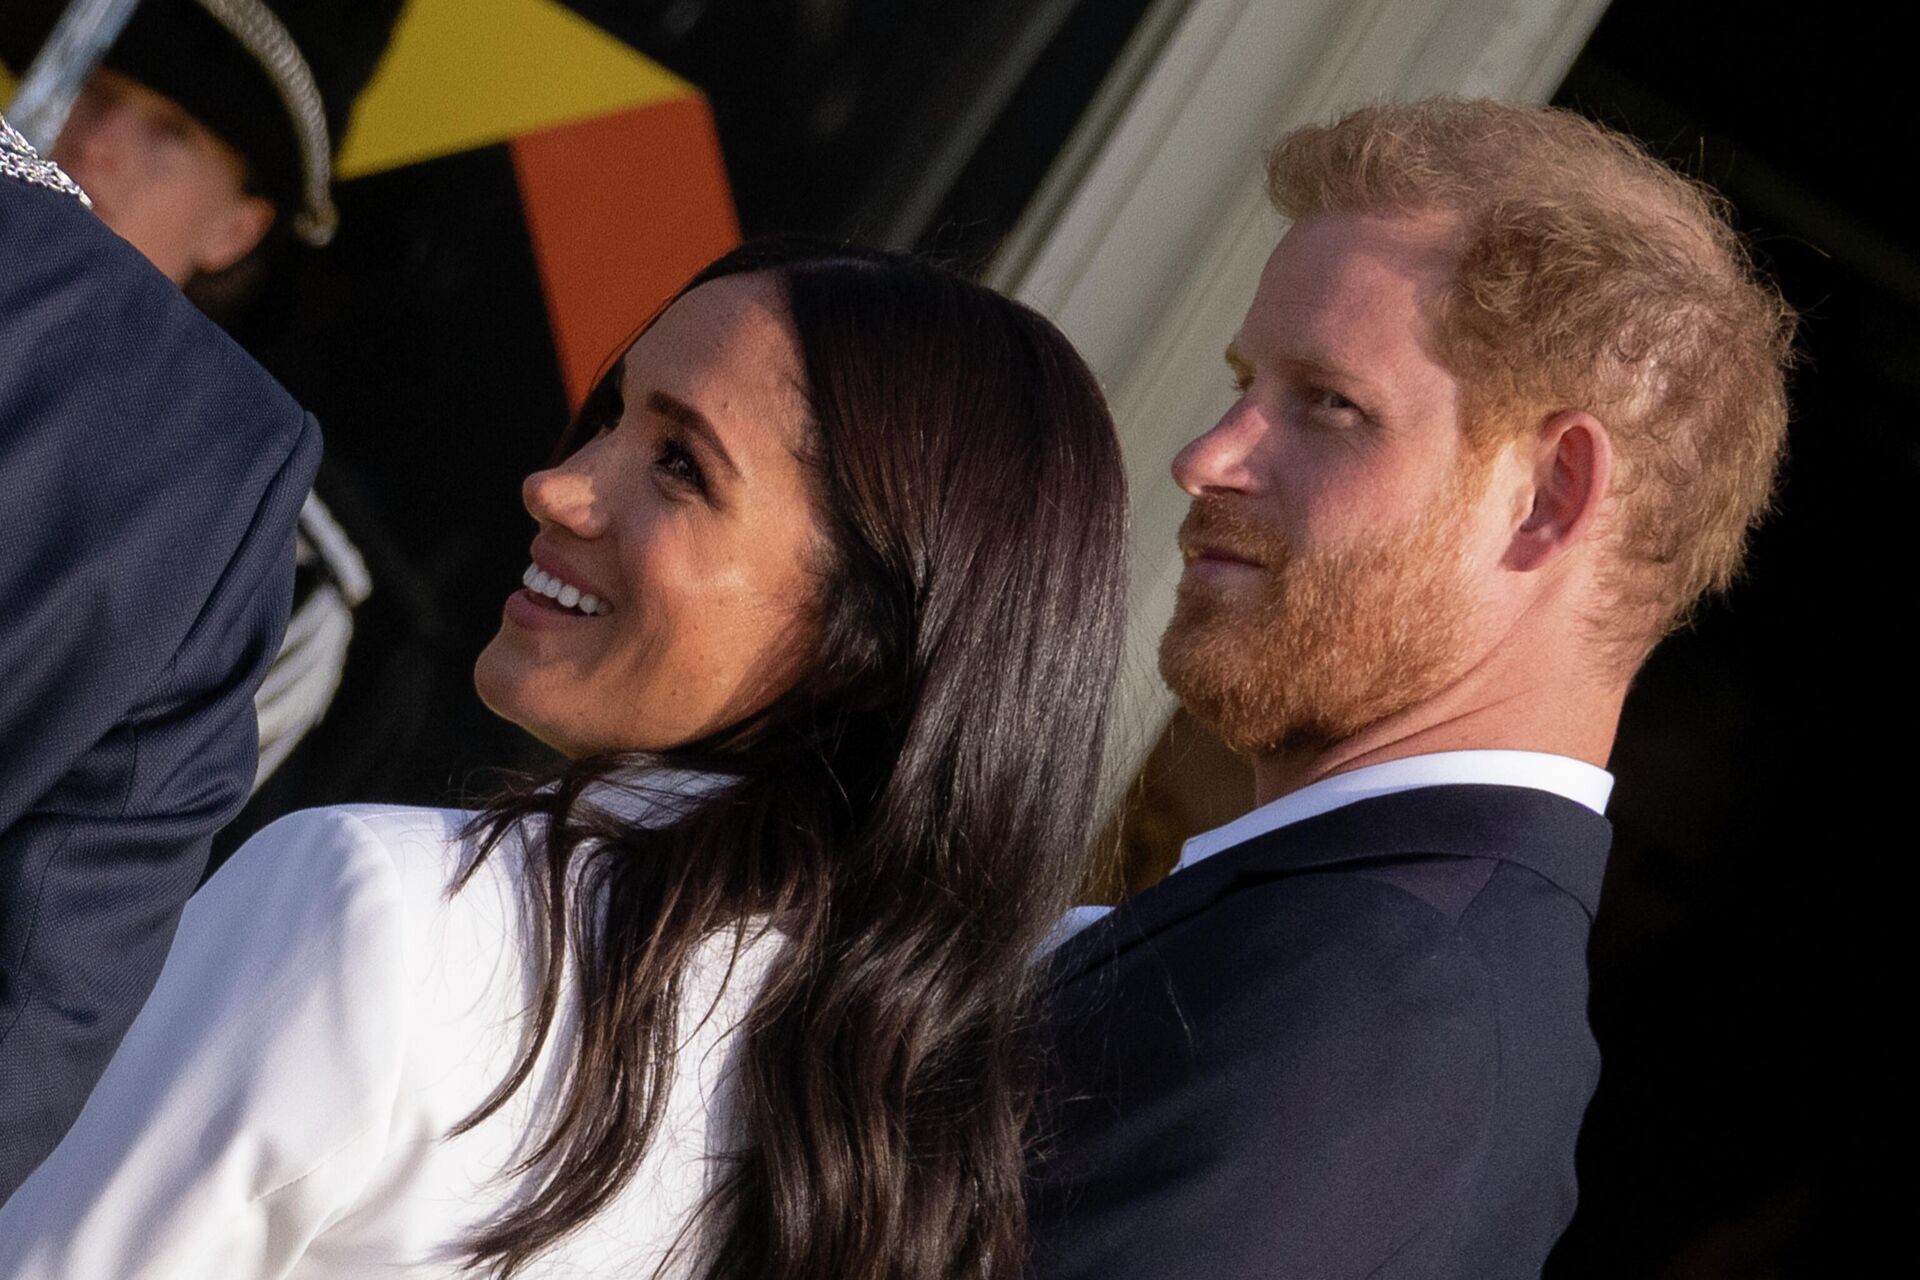 Prince Harry and Meghan Markle, Duke and Duchess of Sussex, arrive at the Invictus Games venue in The Hague, Netherlands, Friday, April 15, 2022.  - Sputnik International, 1920, 23.04.2022